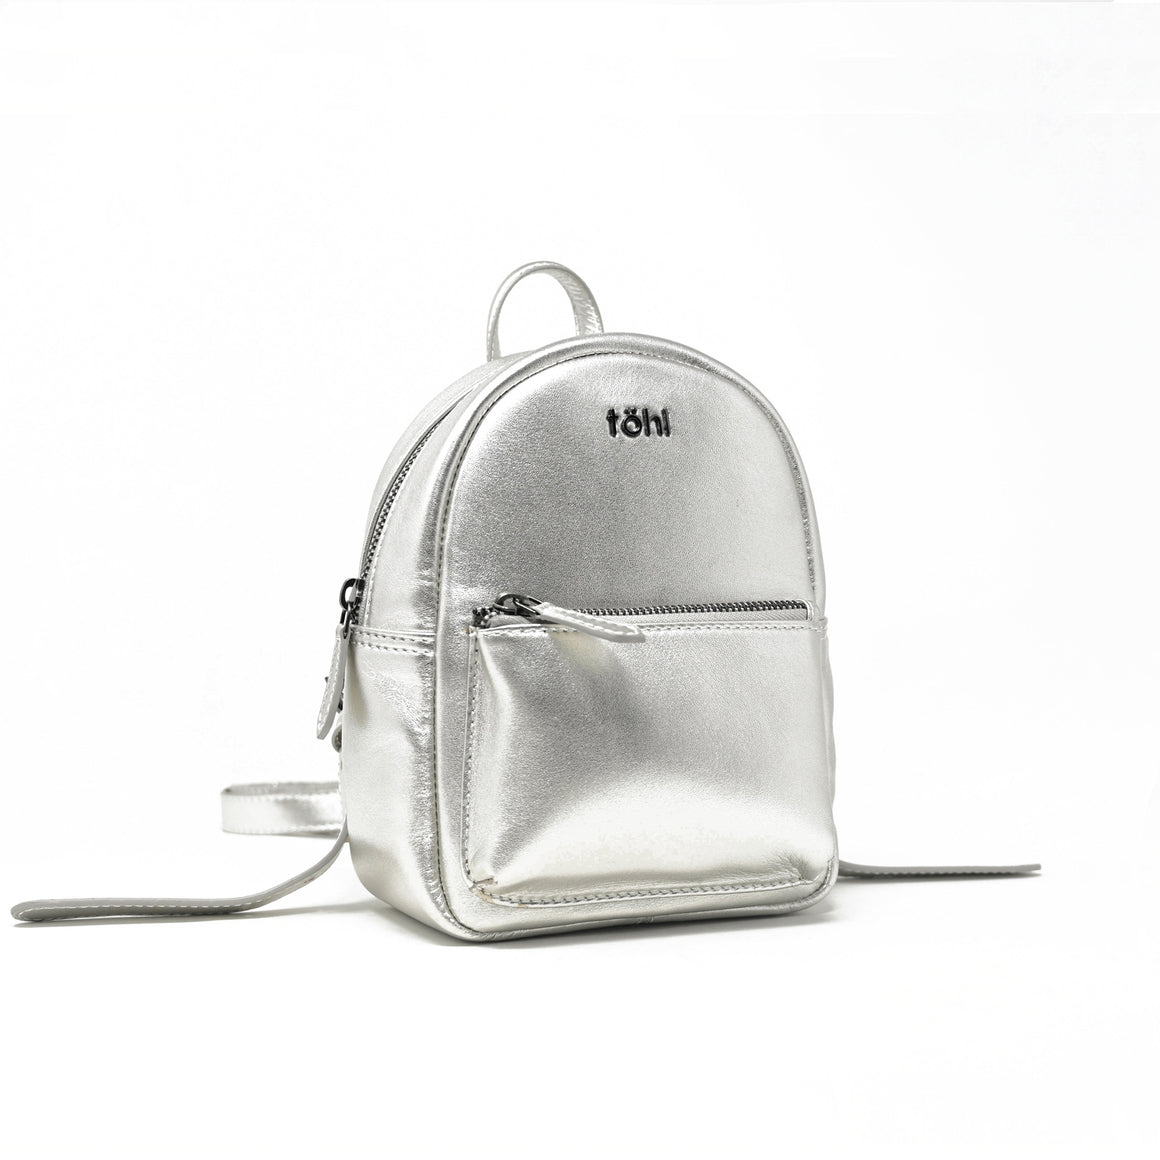 NEVERN WOMEN'S BACKPACK - SILVER